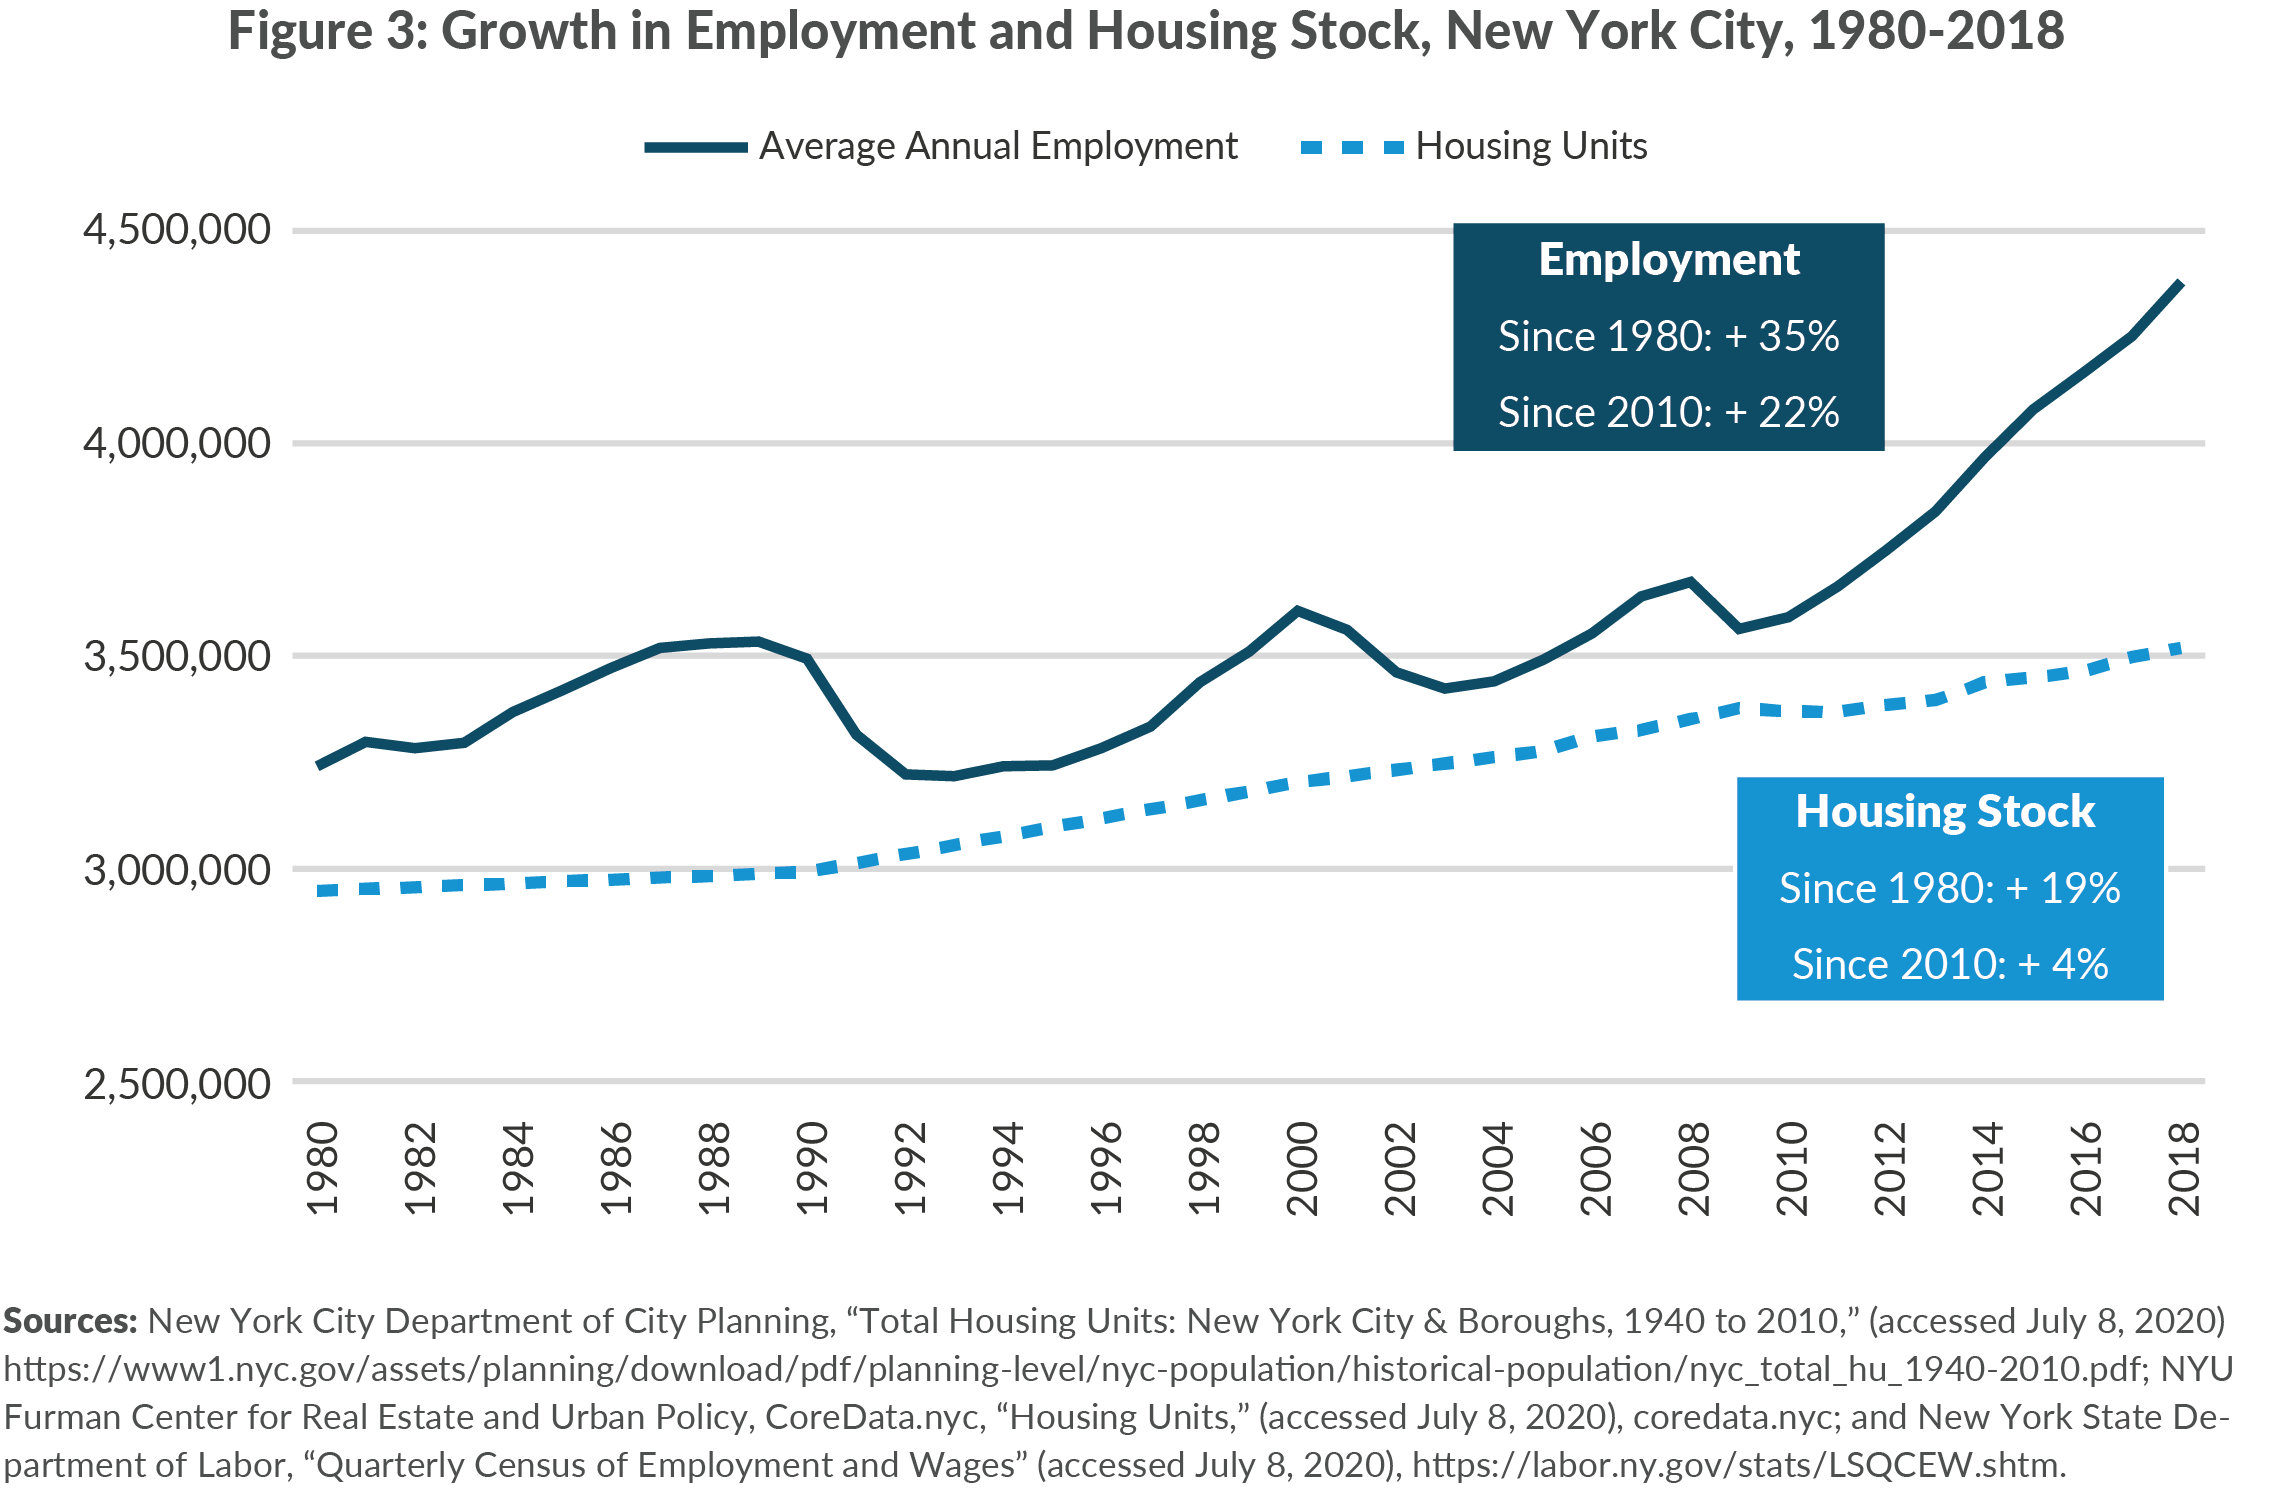 Strategies to Boost Housing Production in the New York City